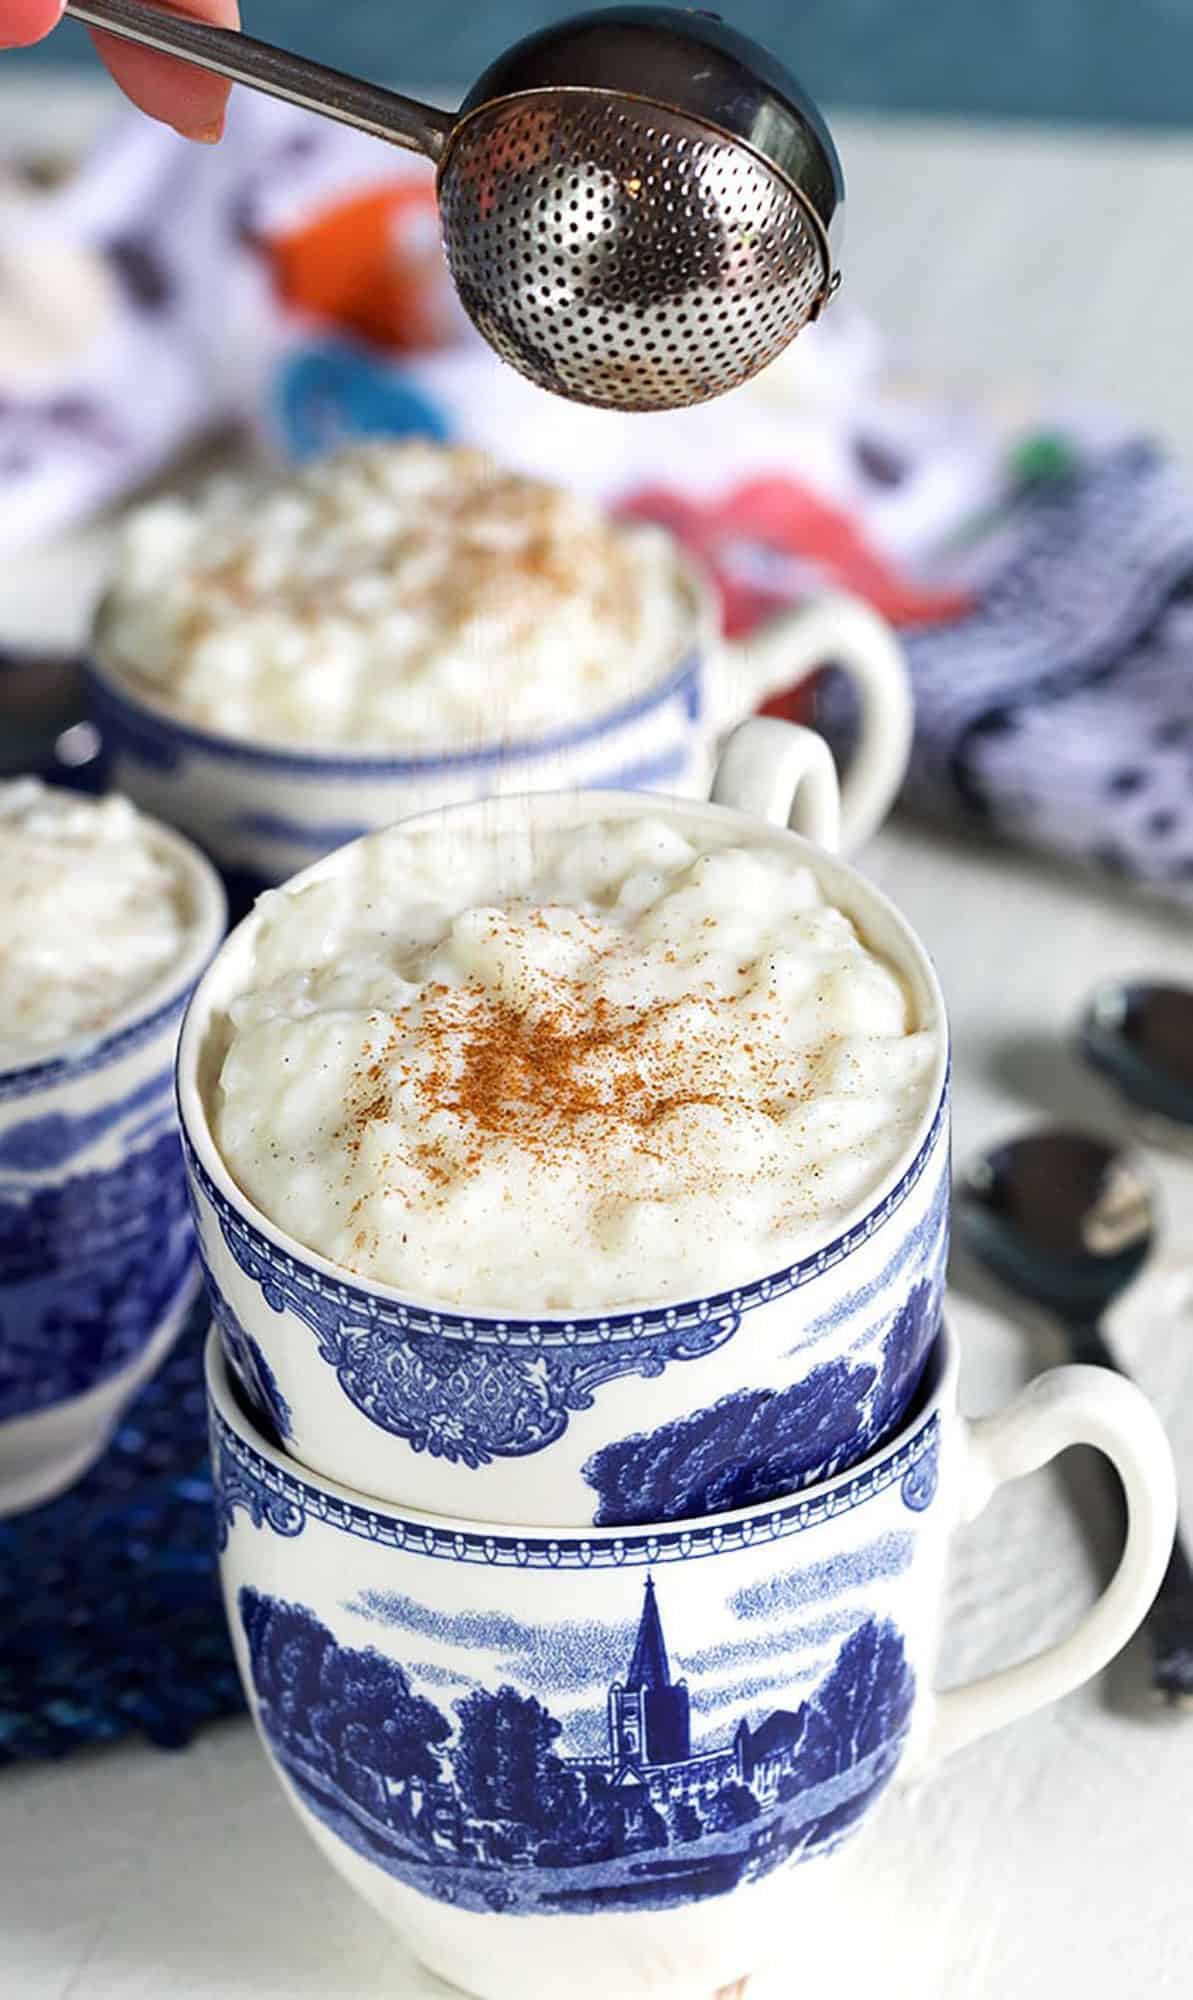 rice pudding in a blue and white tea cup with cinnamon being sprinkled on top